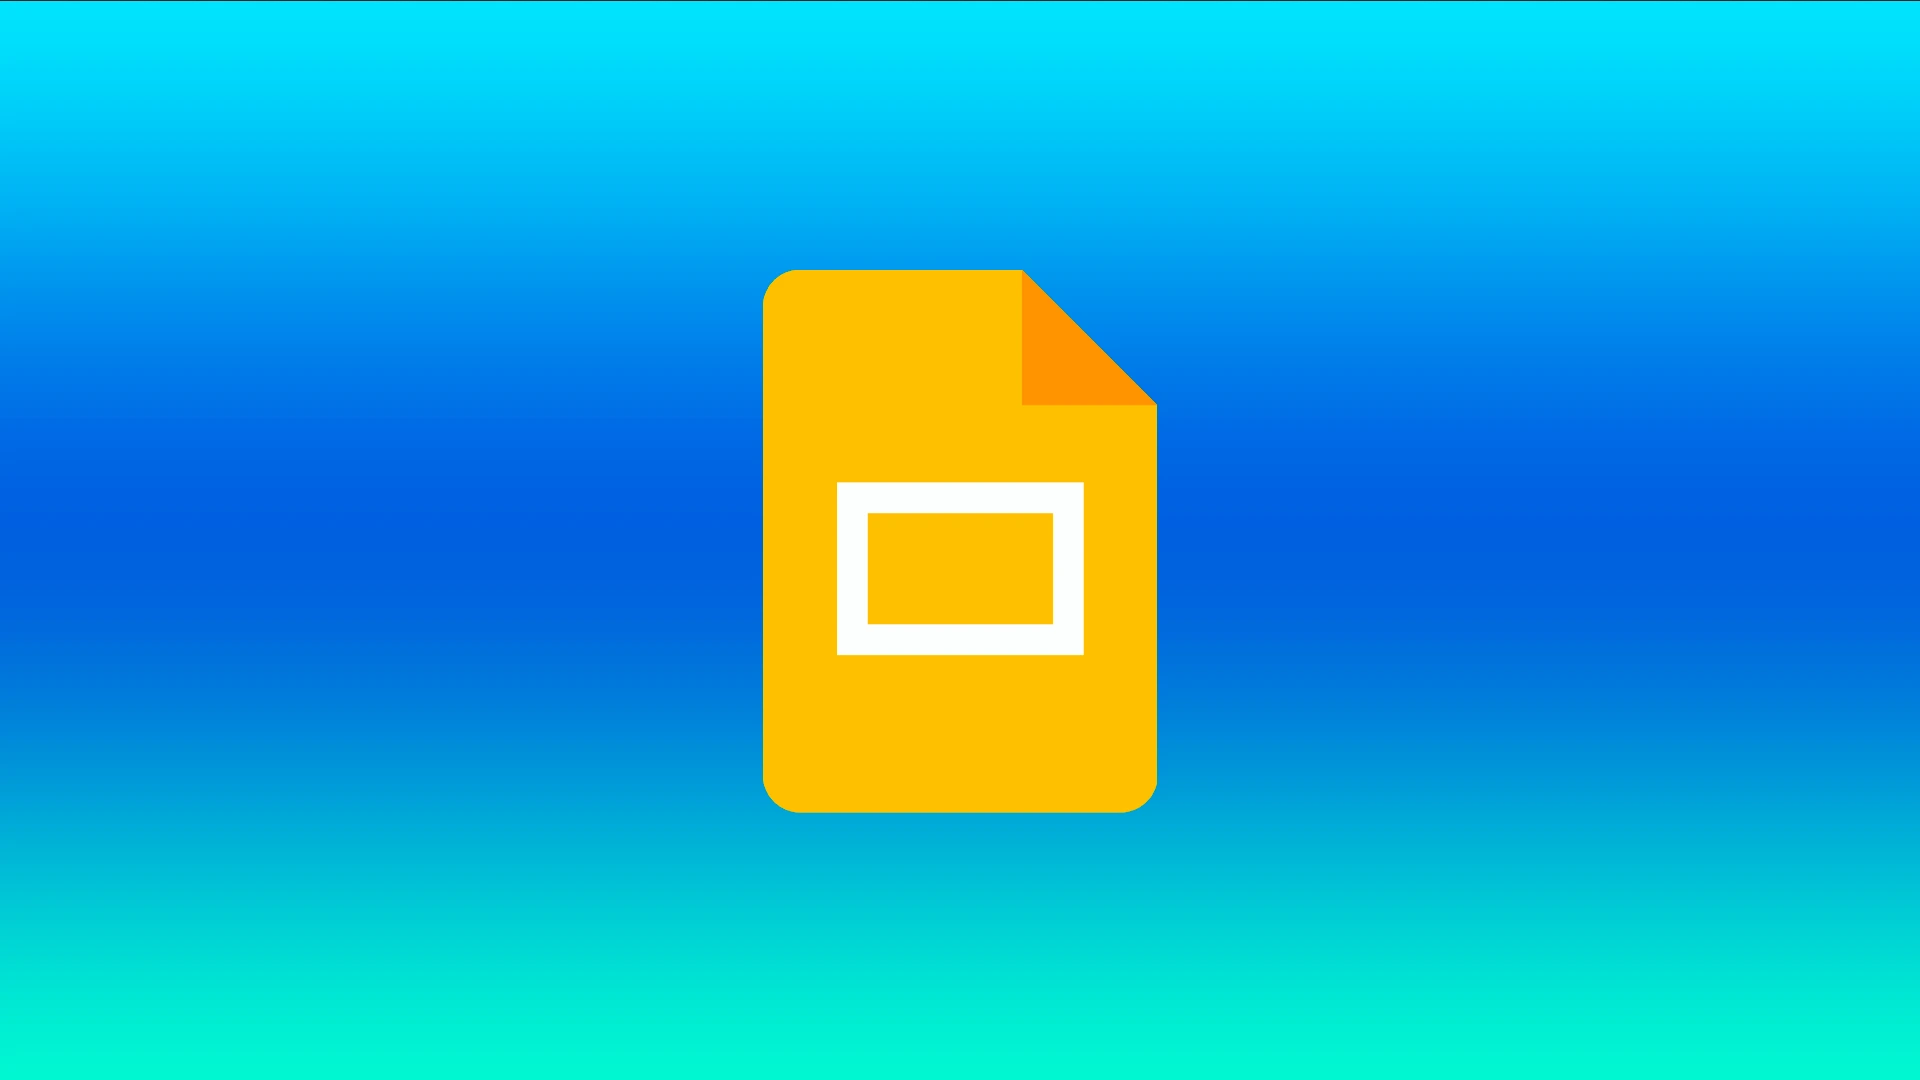 How to change image transparency in Google Slides